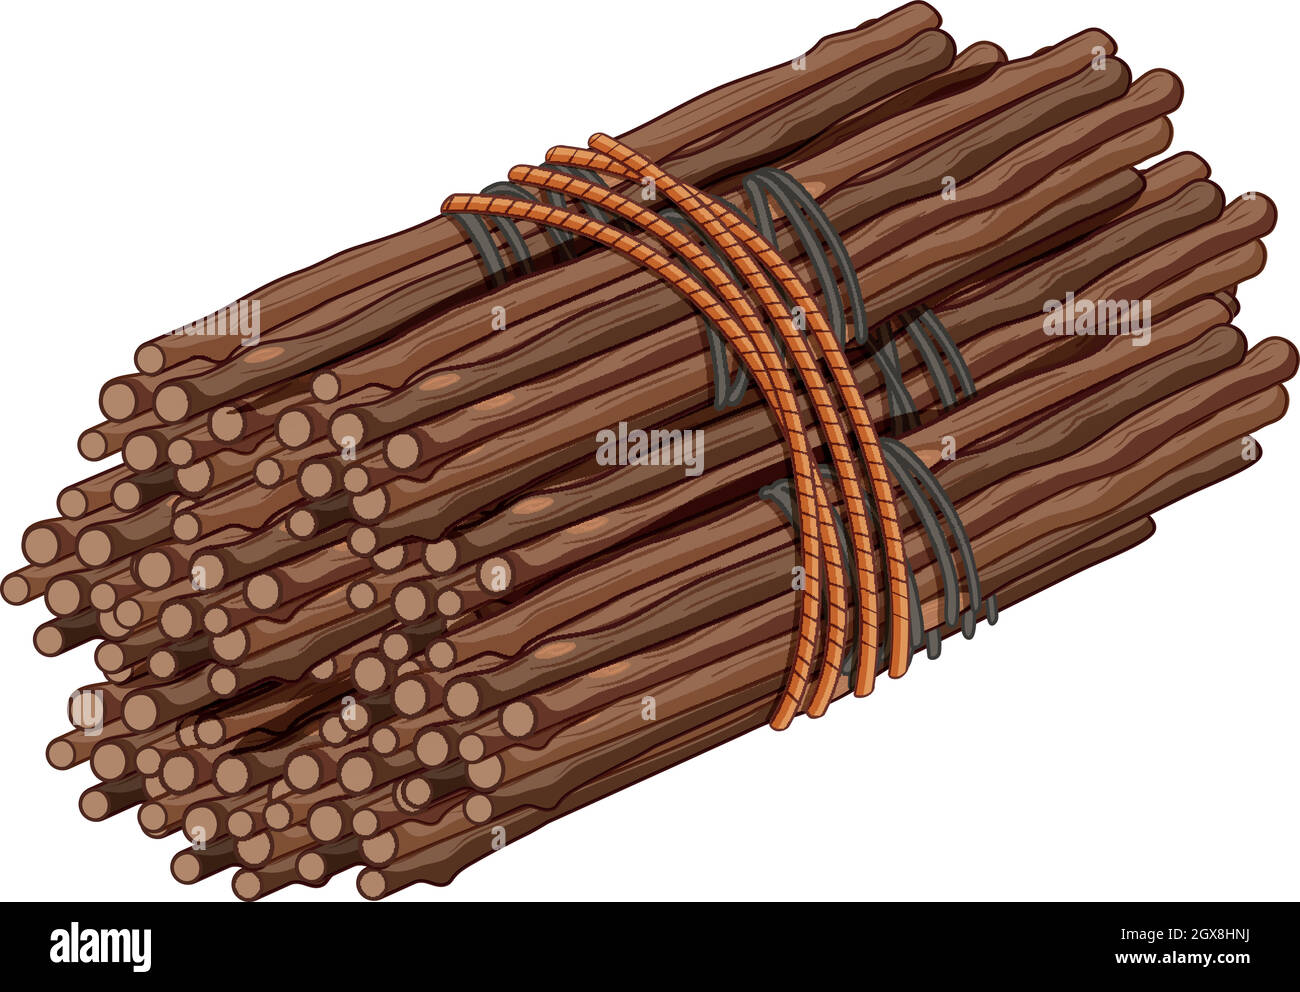 Bundle of firewood Stock Vector Images - Alamy